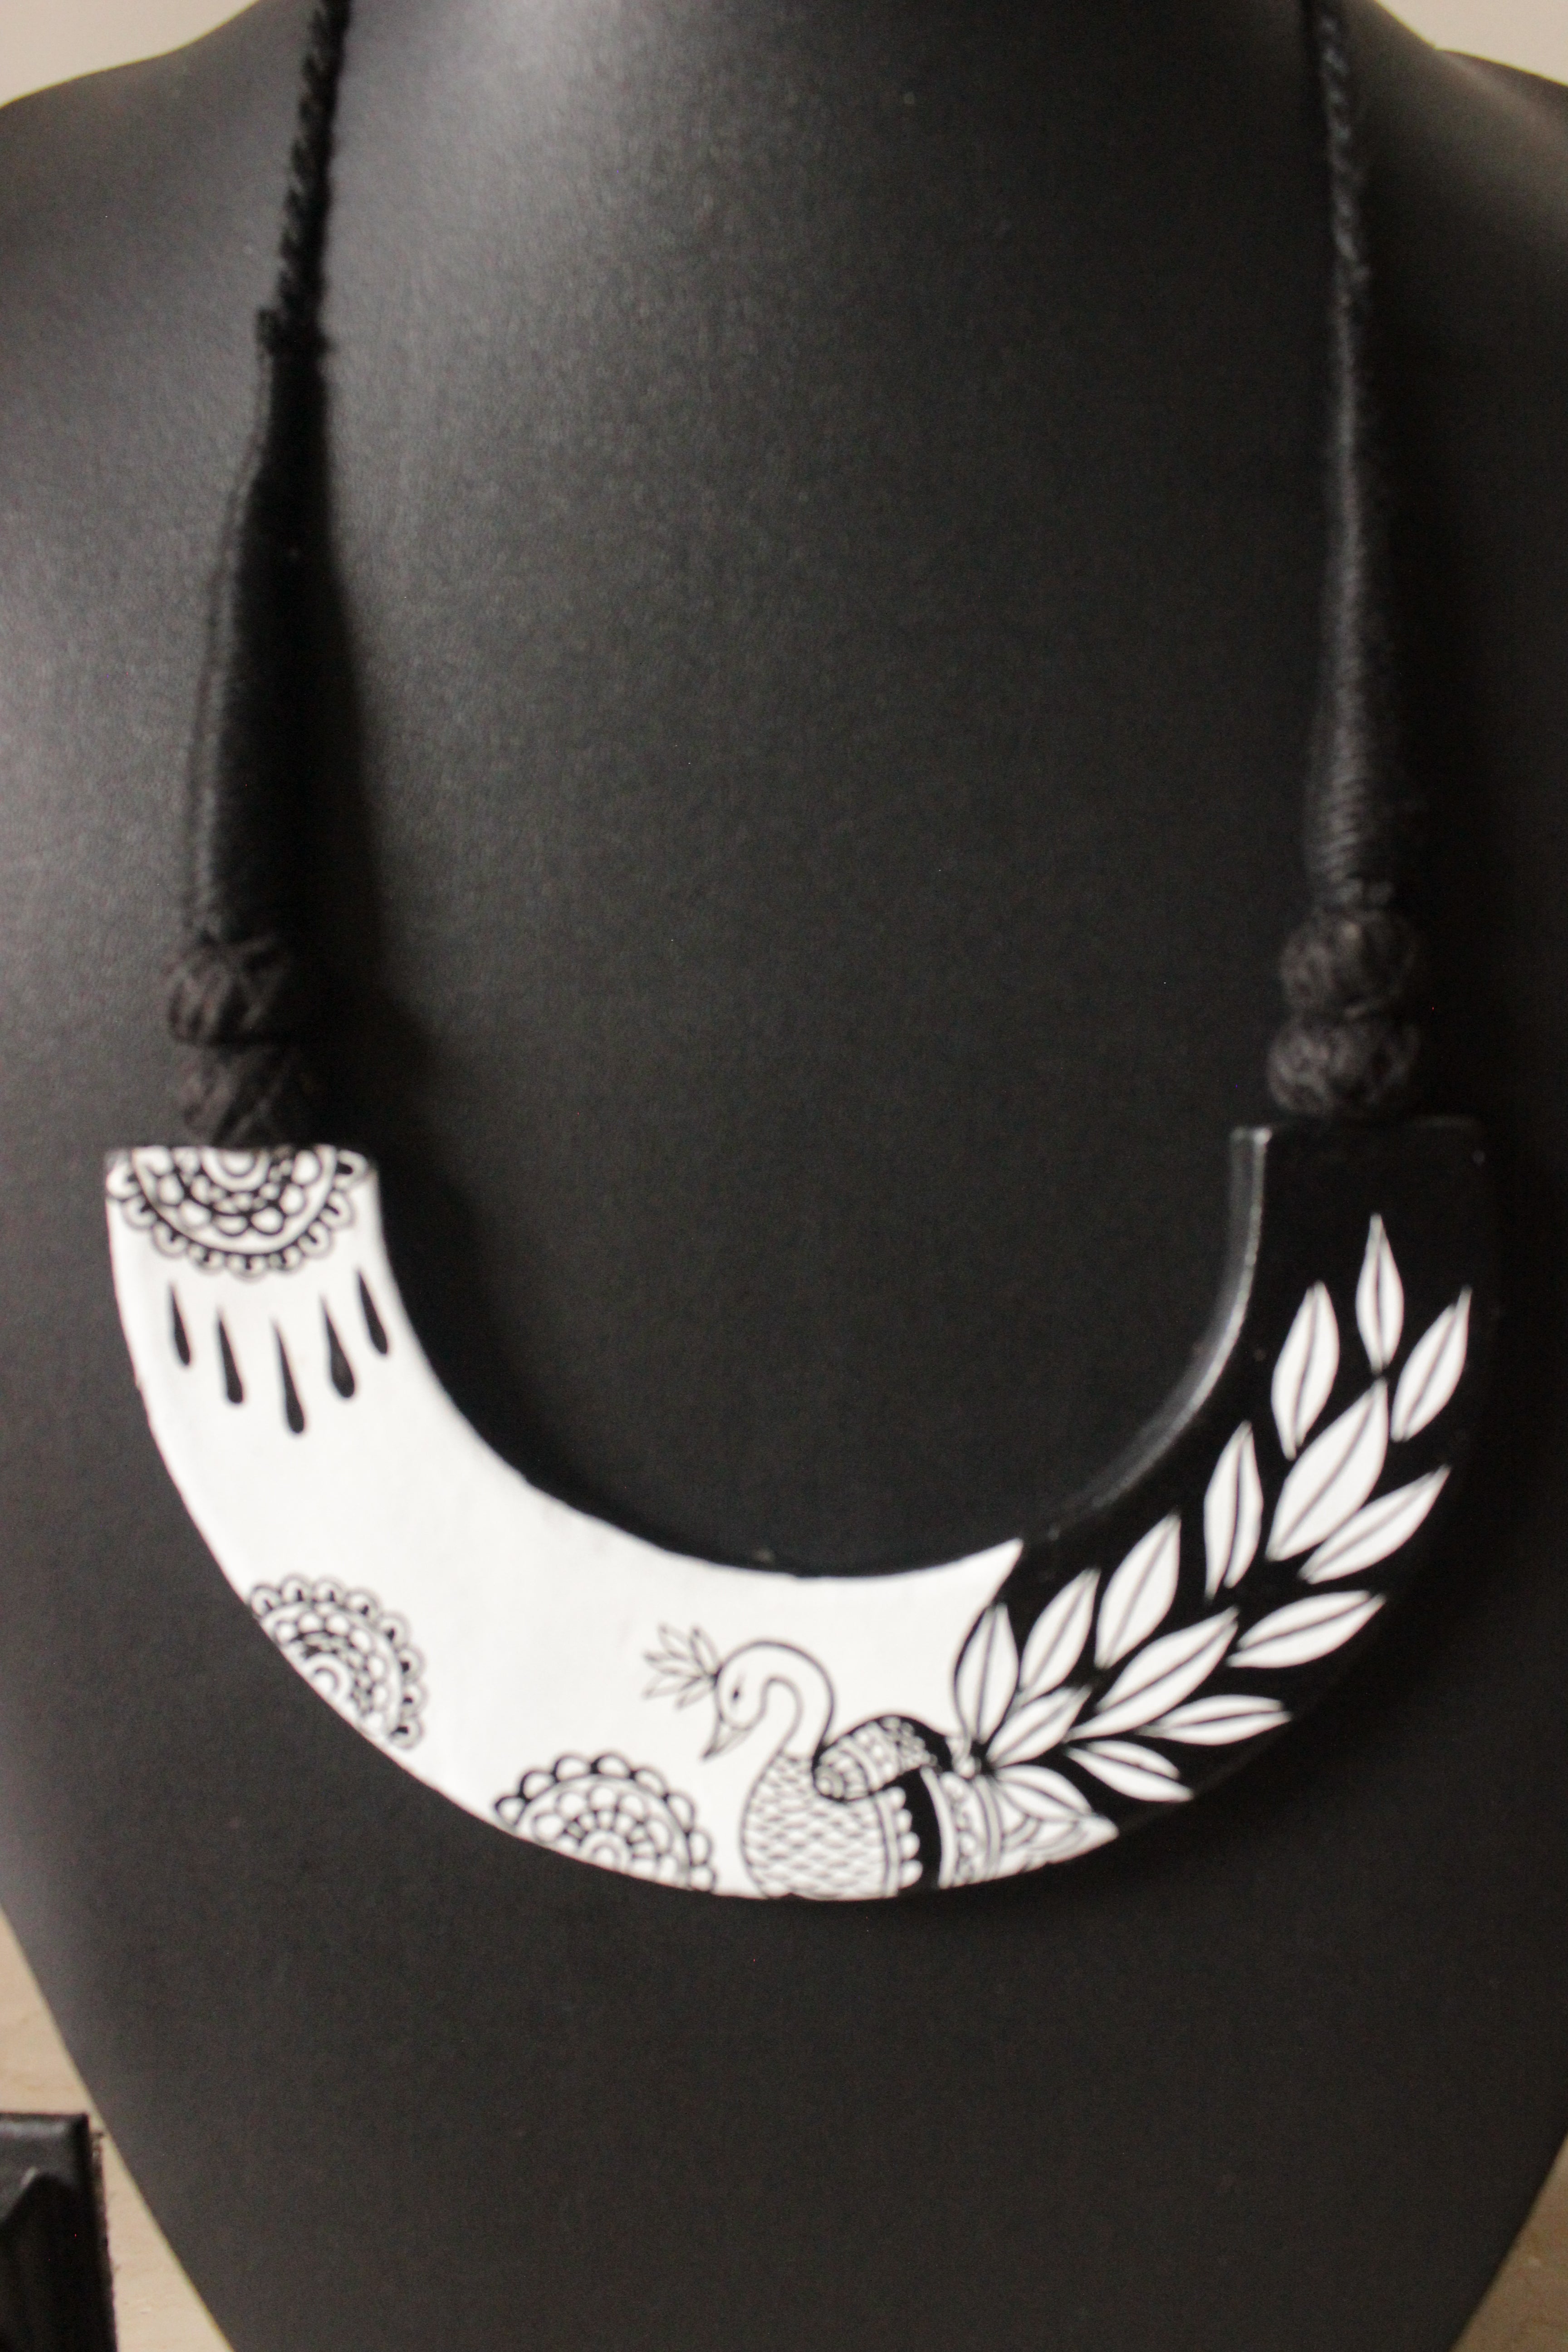 Monochrome Peacock Hand Painted Terracotta Clay Necklace Set with Adjustable Thread Closure